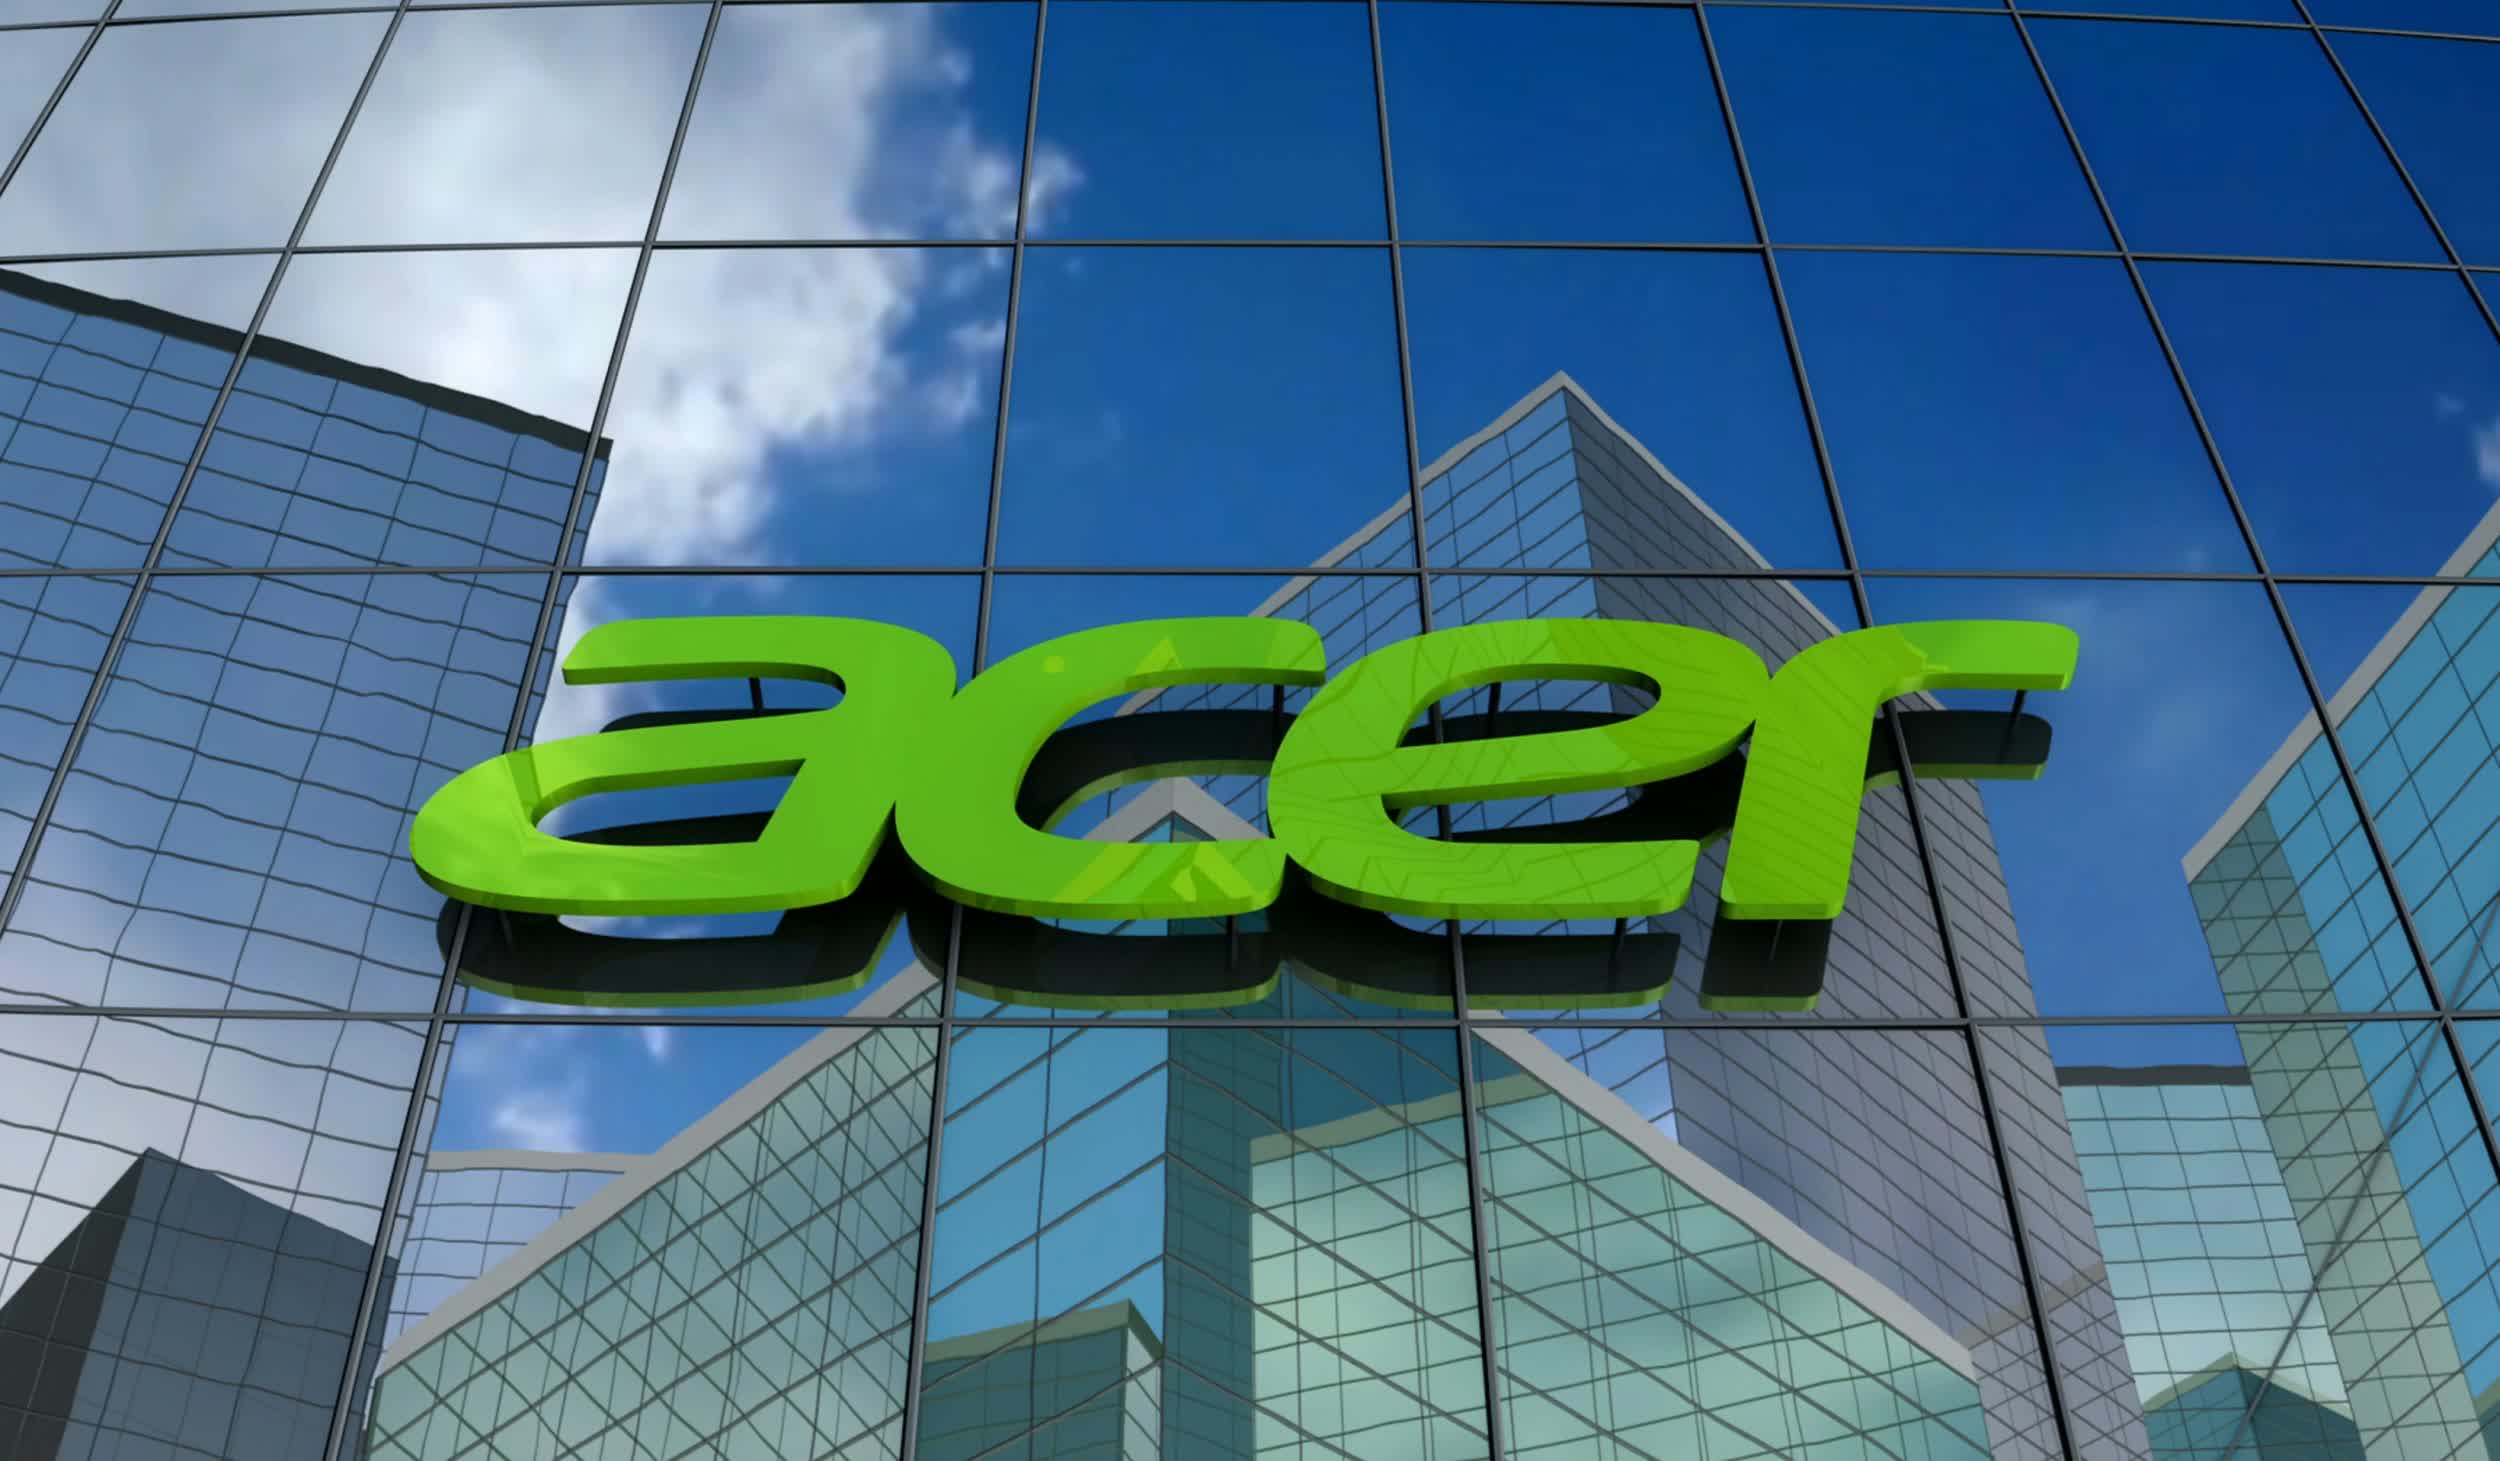 Acer continued shipping products to Russia despite promising to stop